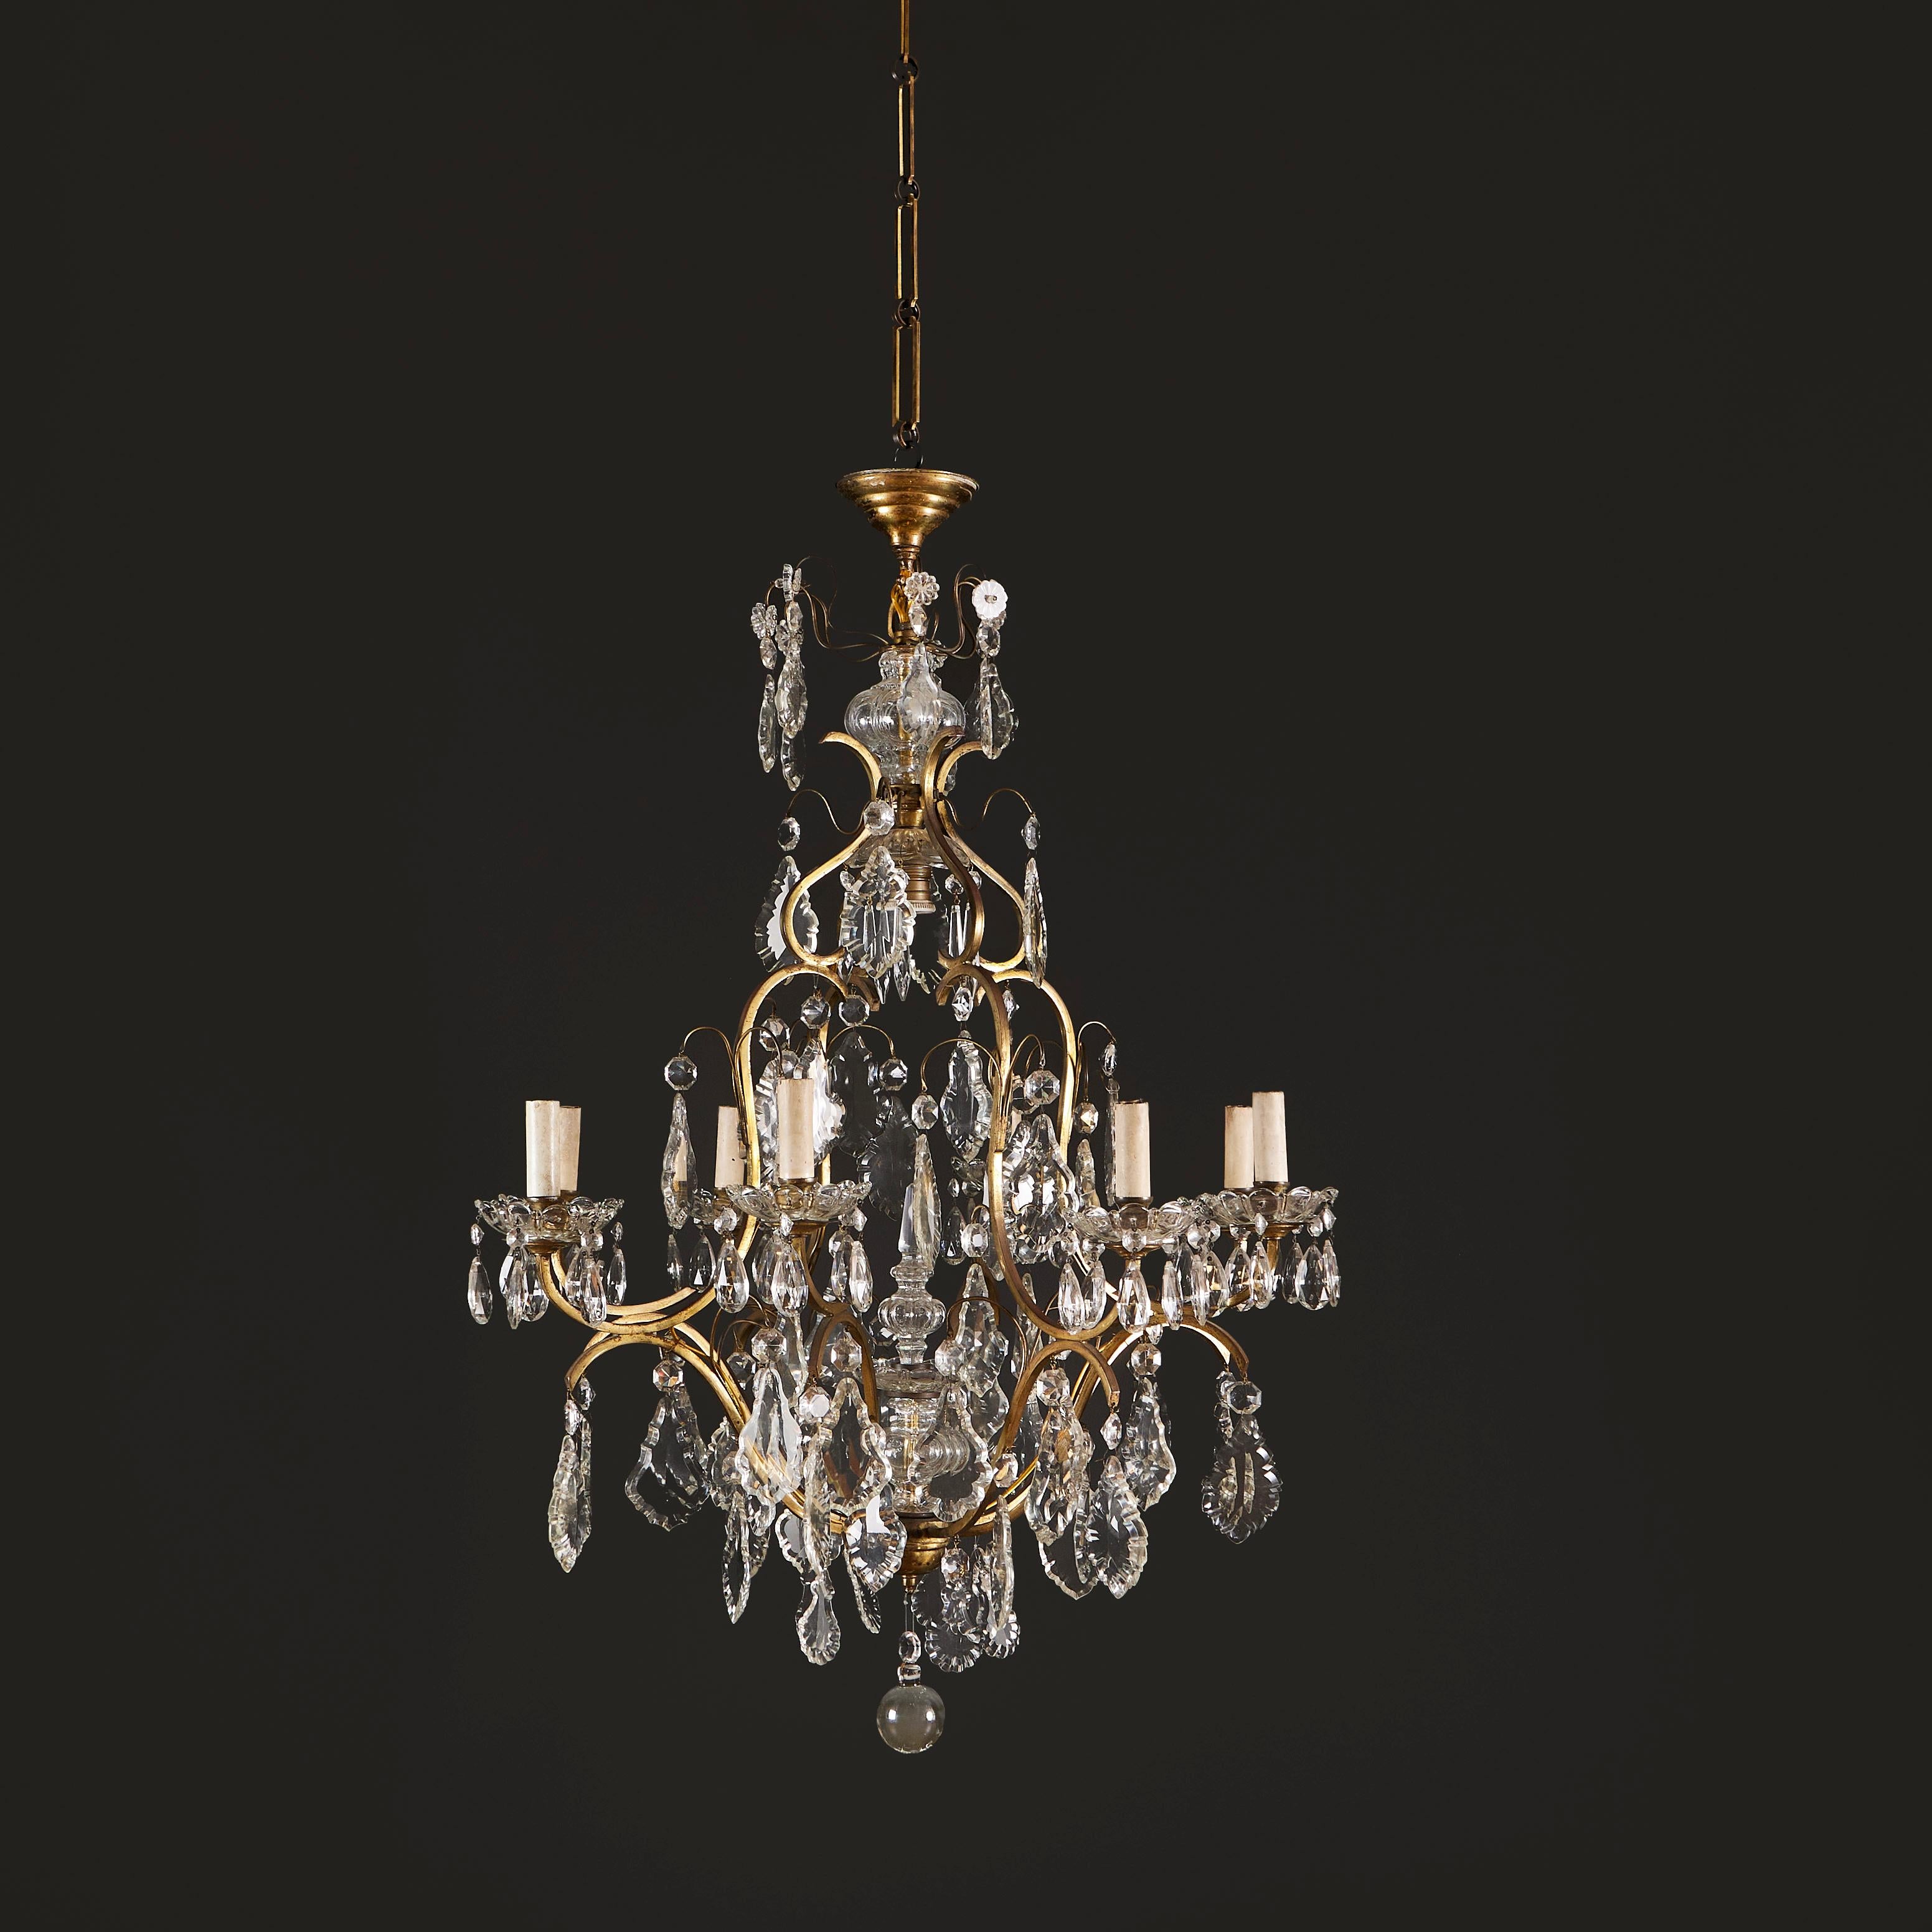 France, circa 1890

A late nineteenth century cut glass chandelier with eight candle arms, the brass scrolling frame adorned with cut glass droplets throughout, the upper level with glass paterae, all terminating in a spherical bauble to the